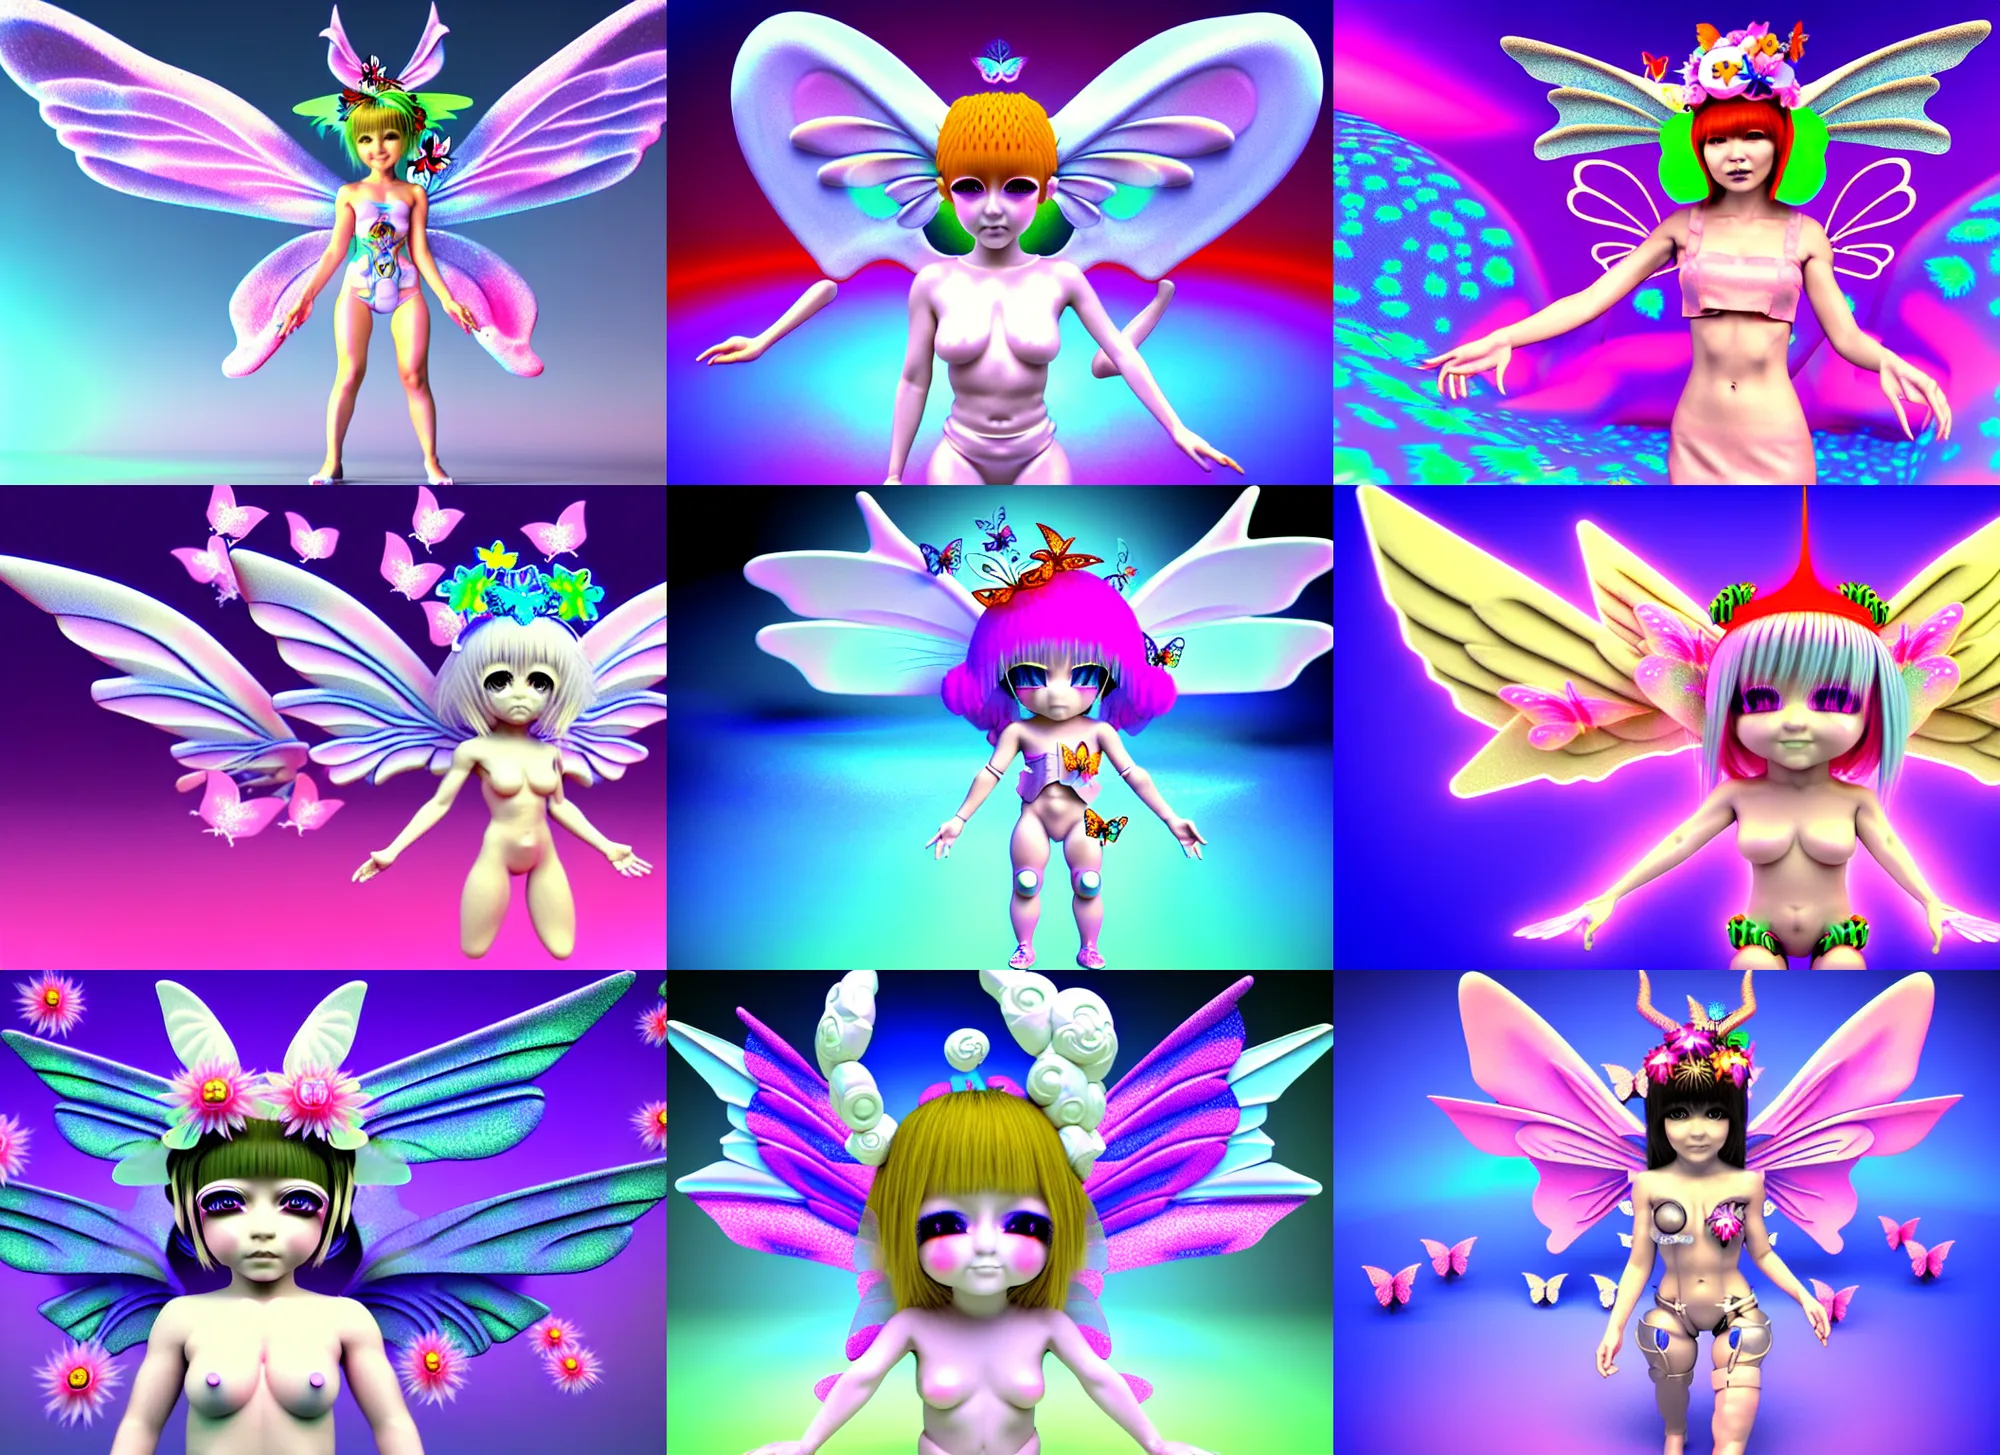 Prompt: 3 d render of chibi cyborg fairy angel by ichiro tanida wearing a jester hat and wearing angel wings against a psychedelic swirly background with 3 d butterflies and 3 d flowers n the style of 1 9 9 0's cg graphics 3 d rendered y 2 k aesthetic by ichiro tanida, 3 do magazine